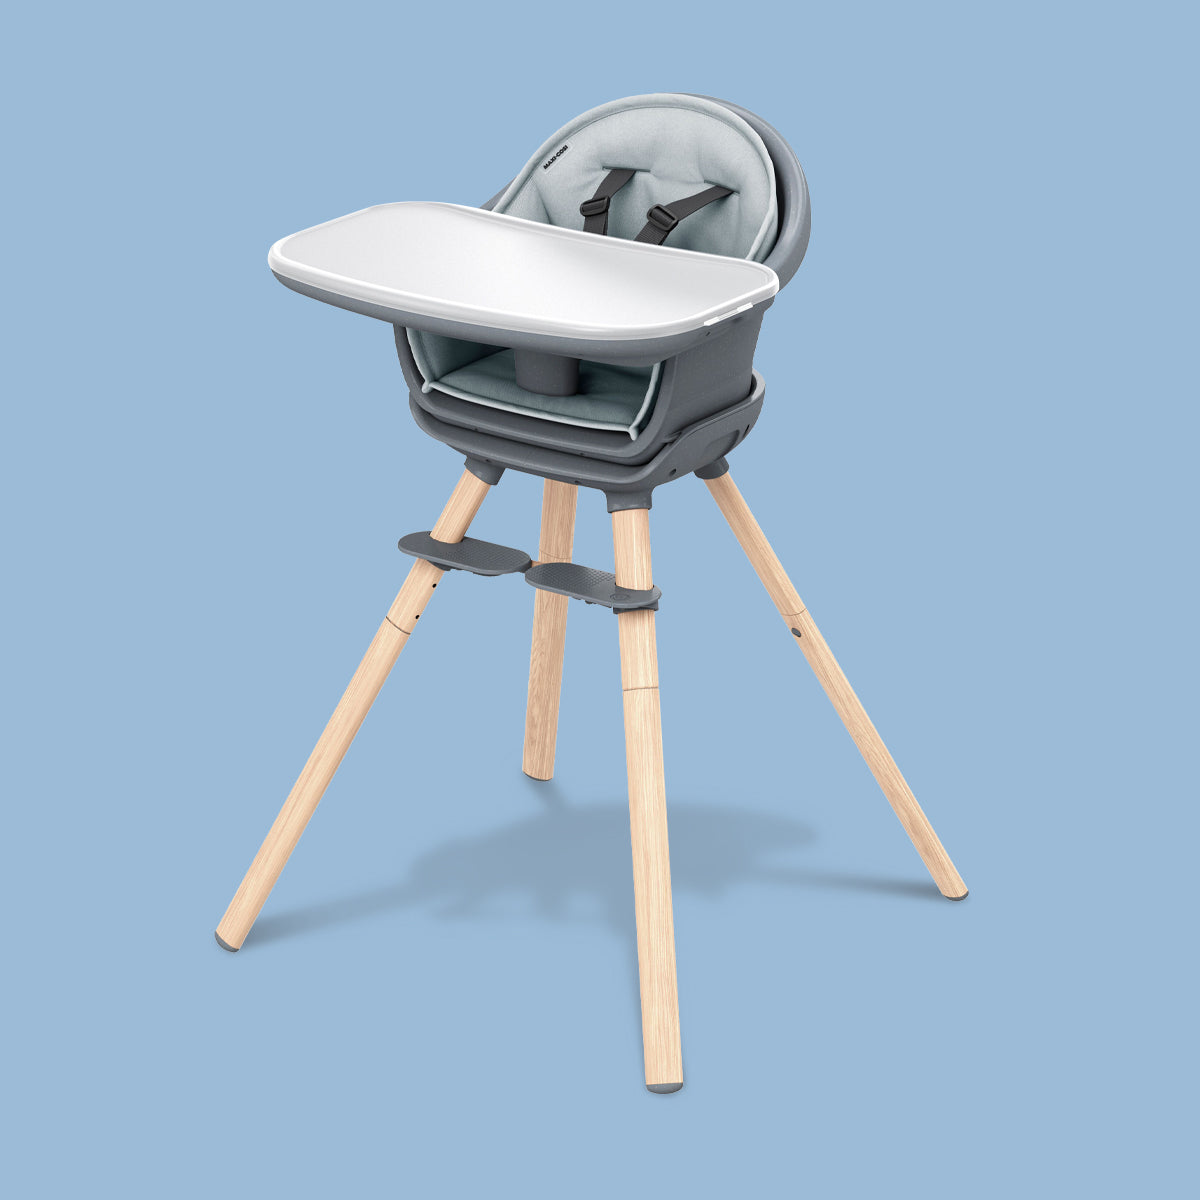 A Maxi-Cosi Moa 8-in-1 High Chair with a wooden base on a blue background, designed for multi-use.